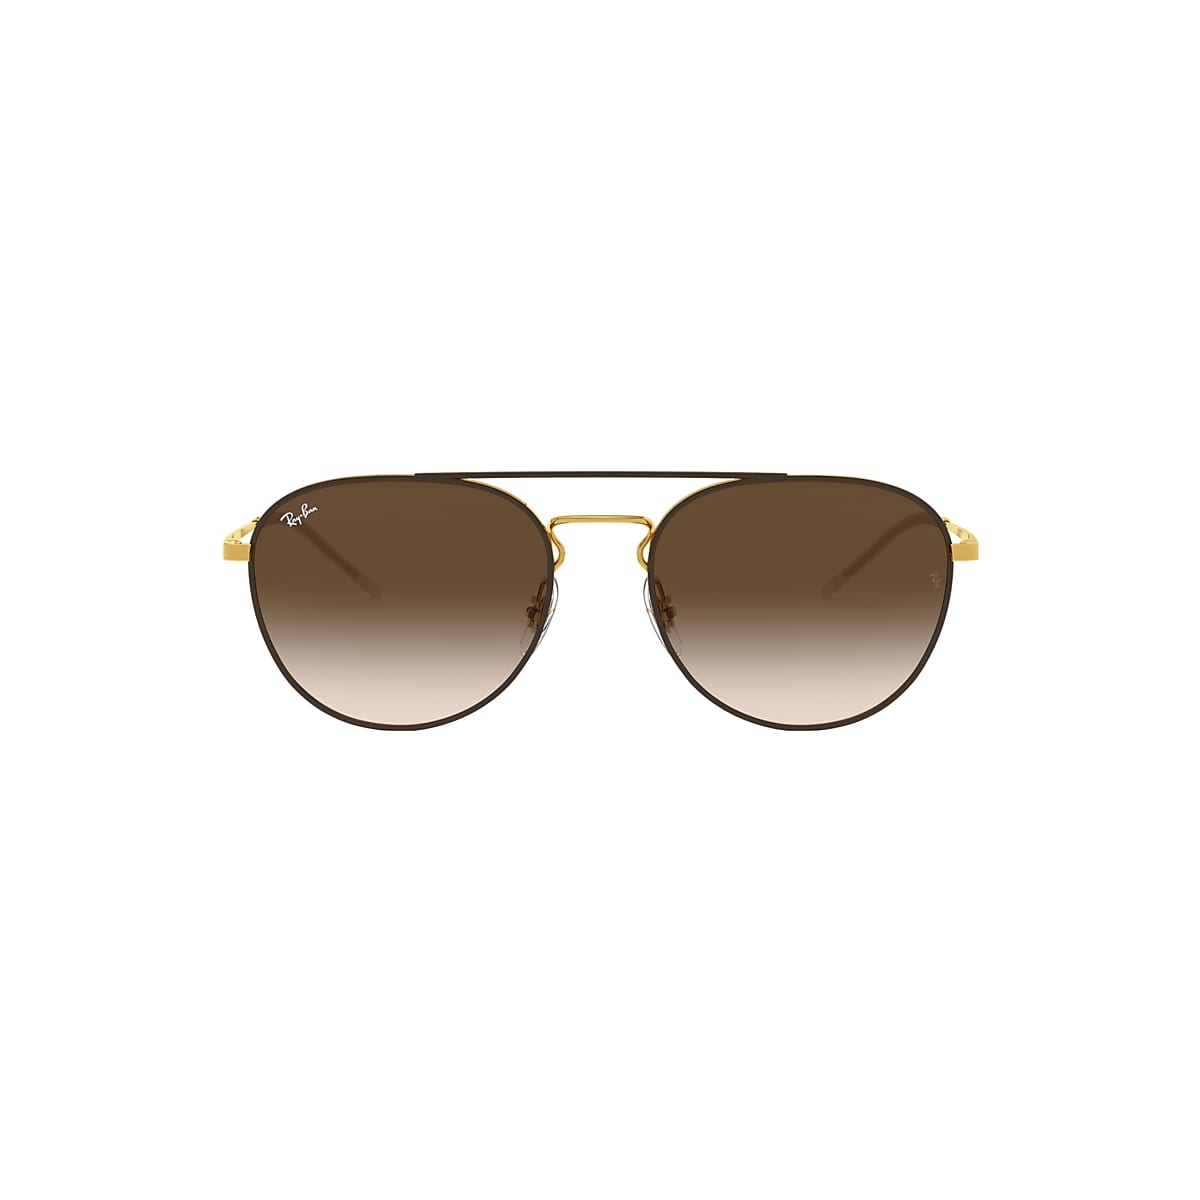 RB3589 Sunglasses in Brown On Gold and Brown - Ray-Ban